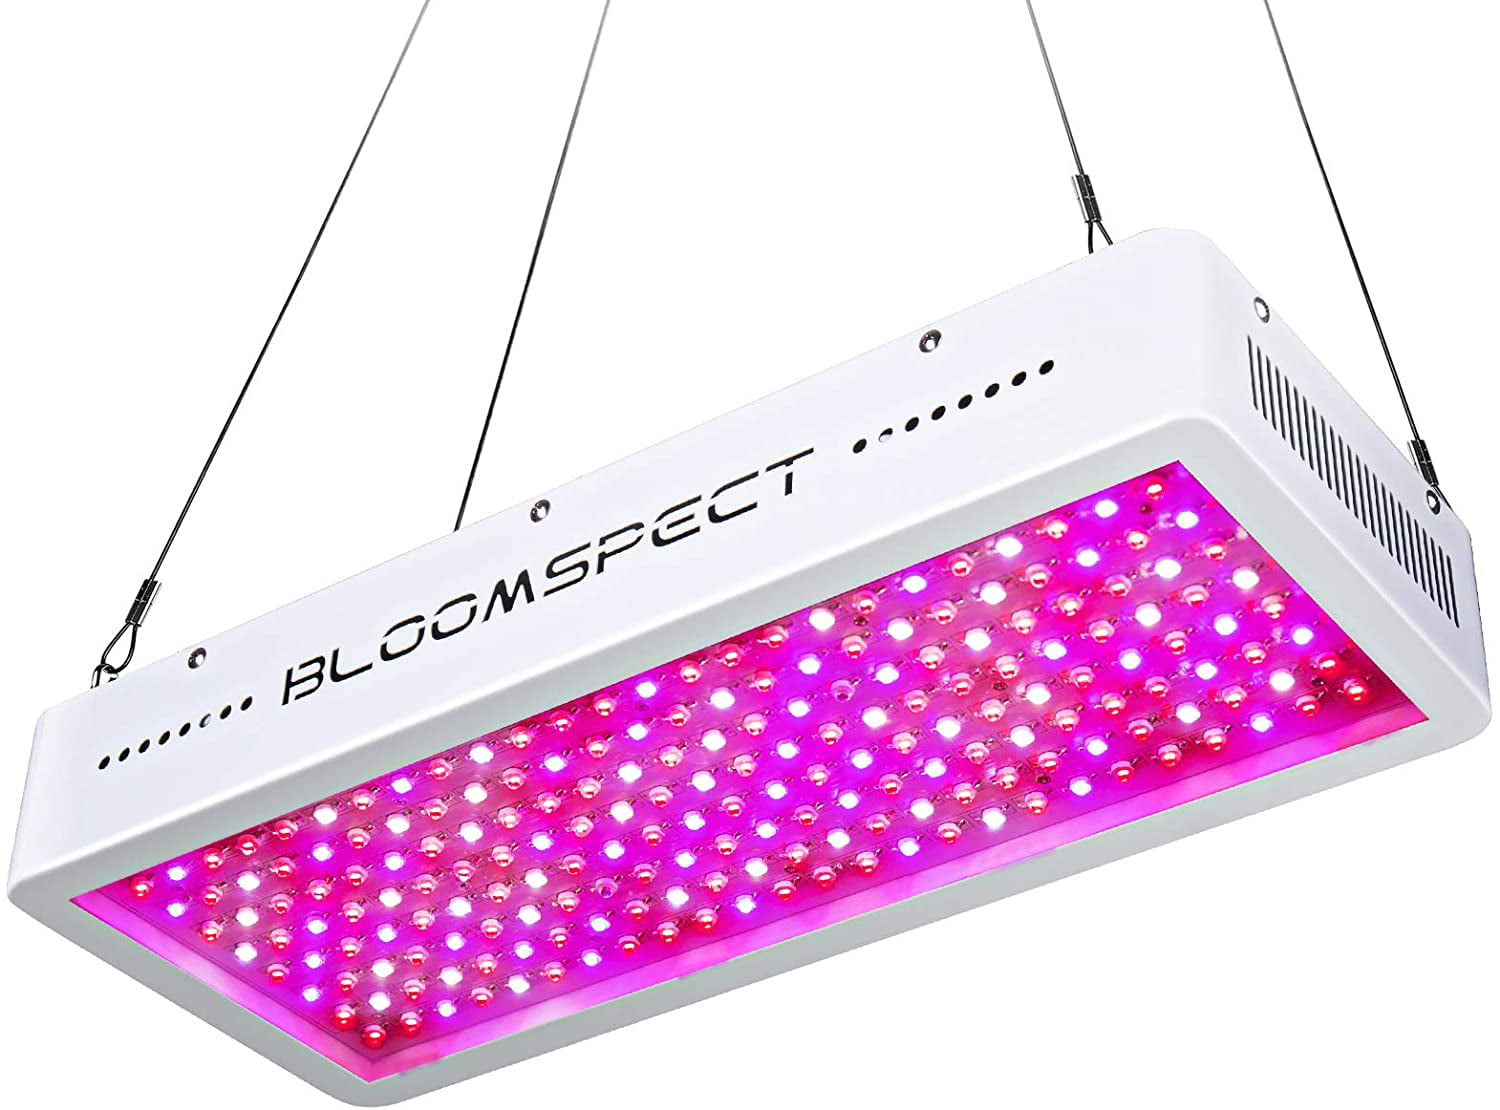 Details about   2000W LED Grow Light Full Spectrum Hydroponic Indoor Plant Veg Bloom Flower Lamp 